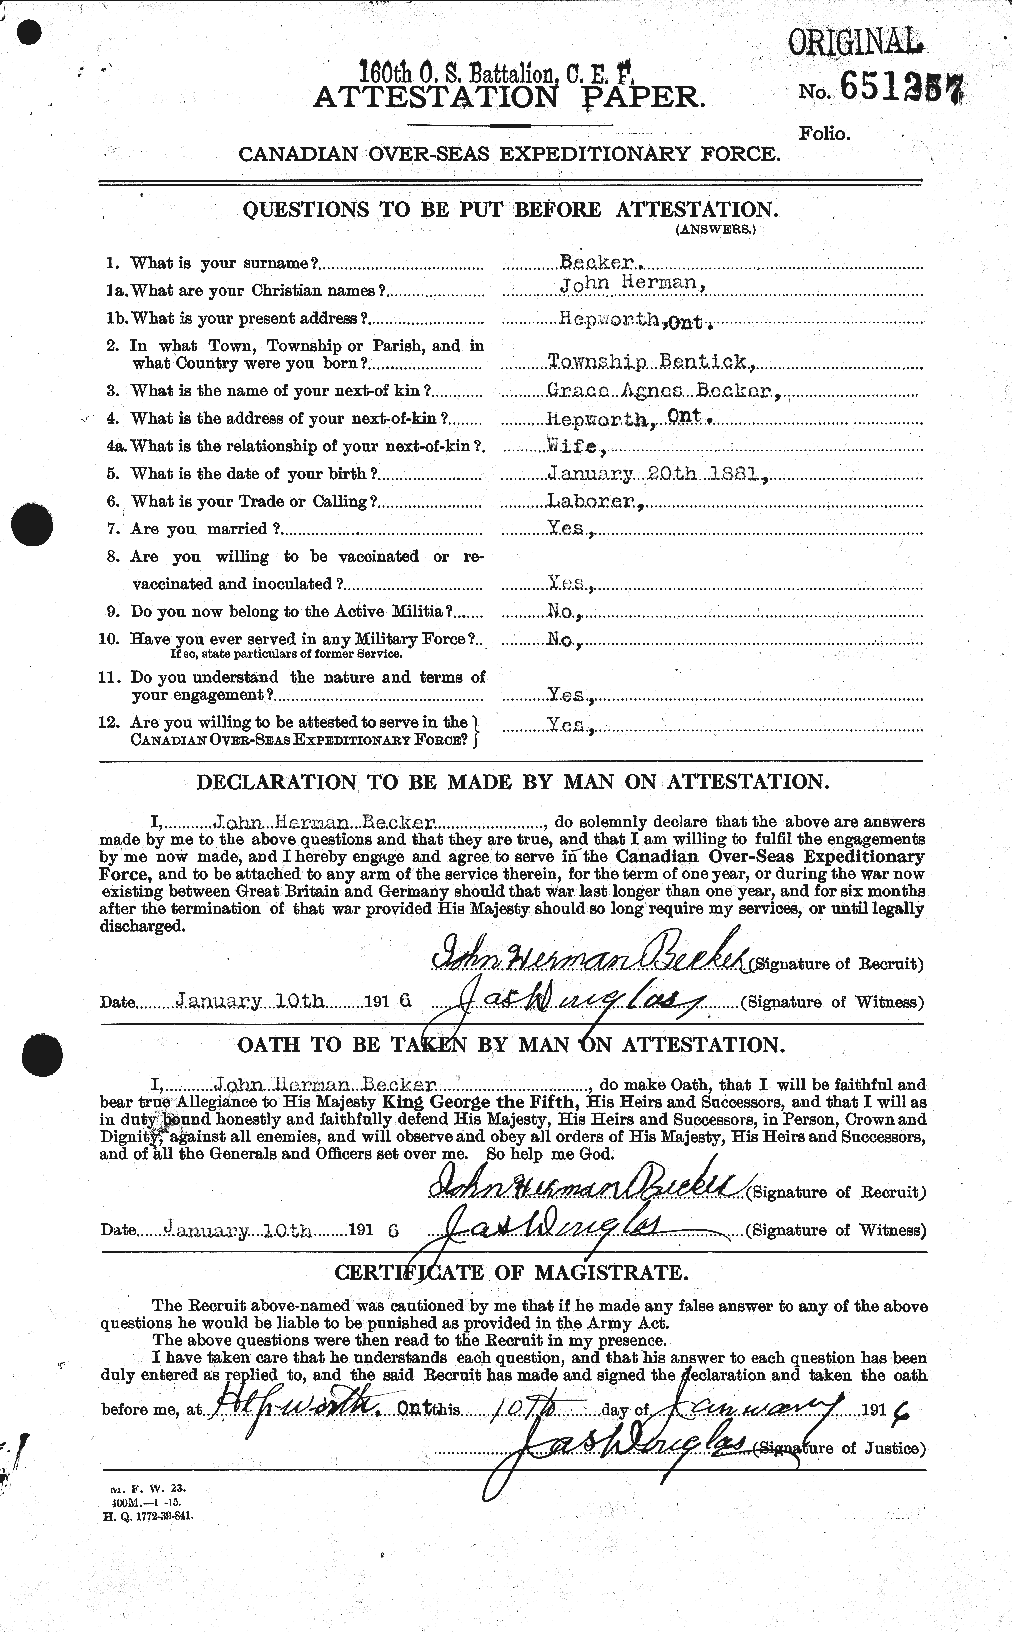 Personnel Records of the First World War - CEF 232298a